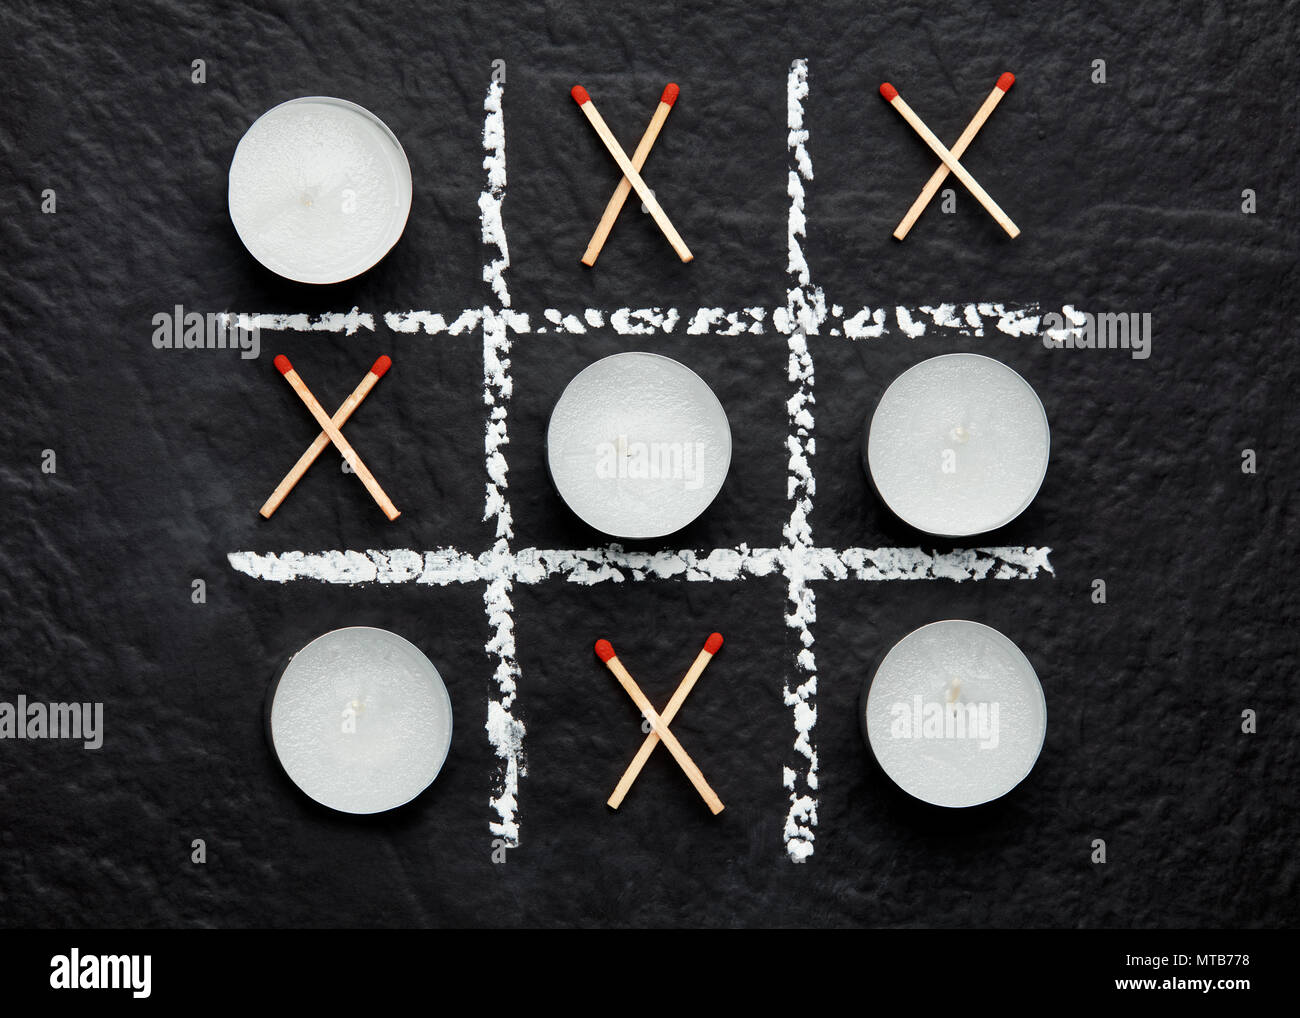 Tic tac toe xo game with candles and matches on textured black surface. Concept of do or die and life or death. Top down close up view. Stock Photo